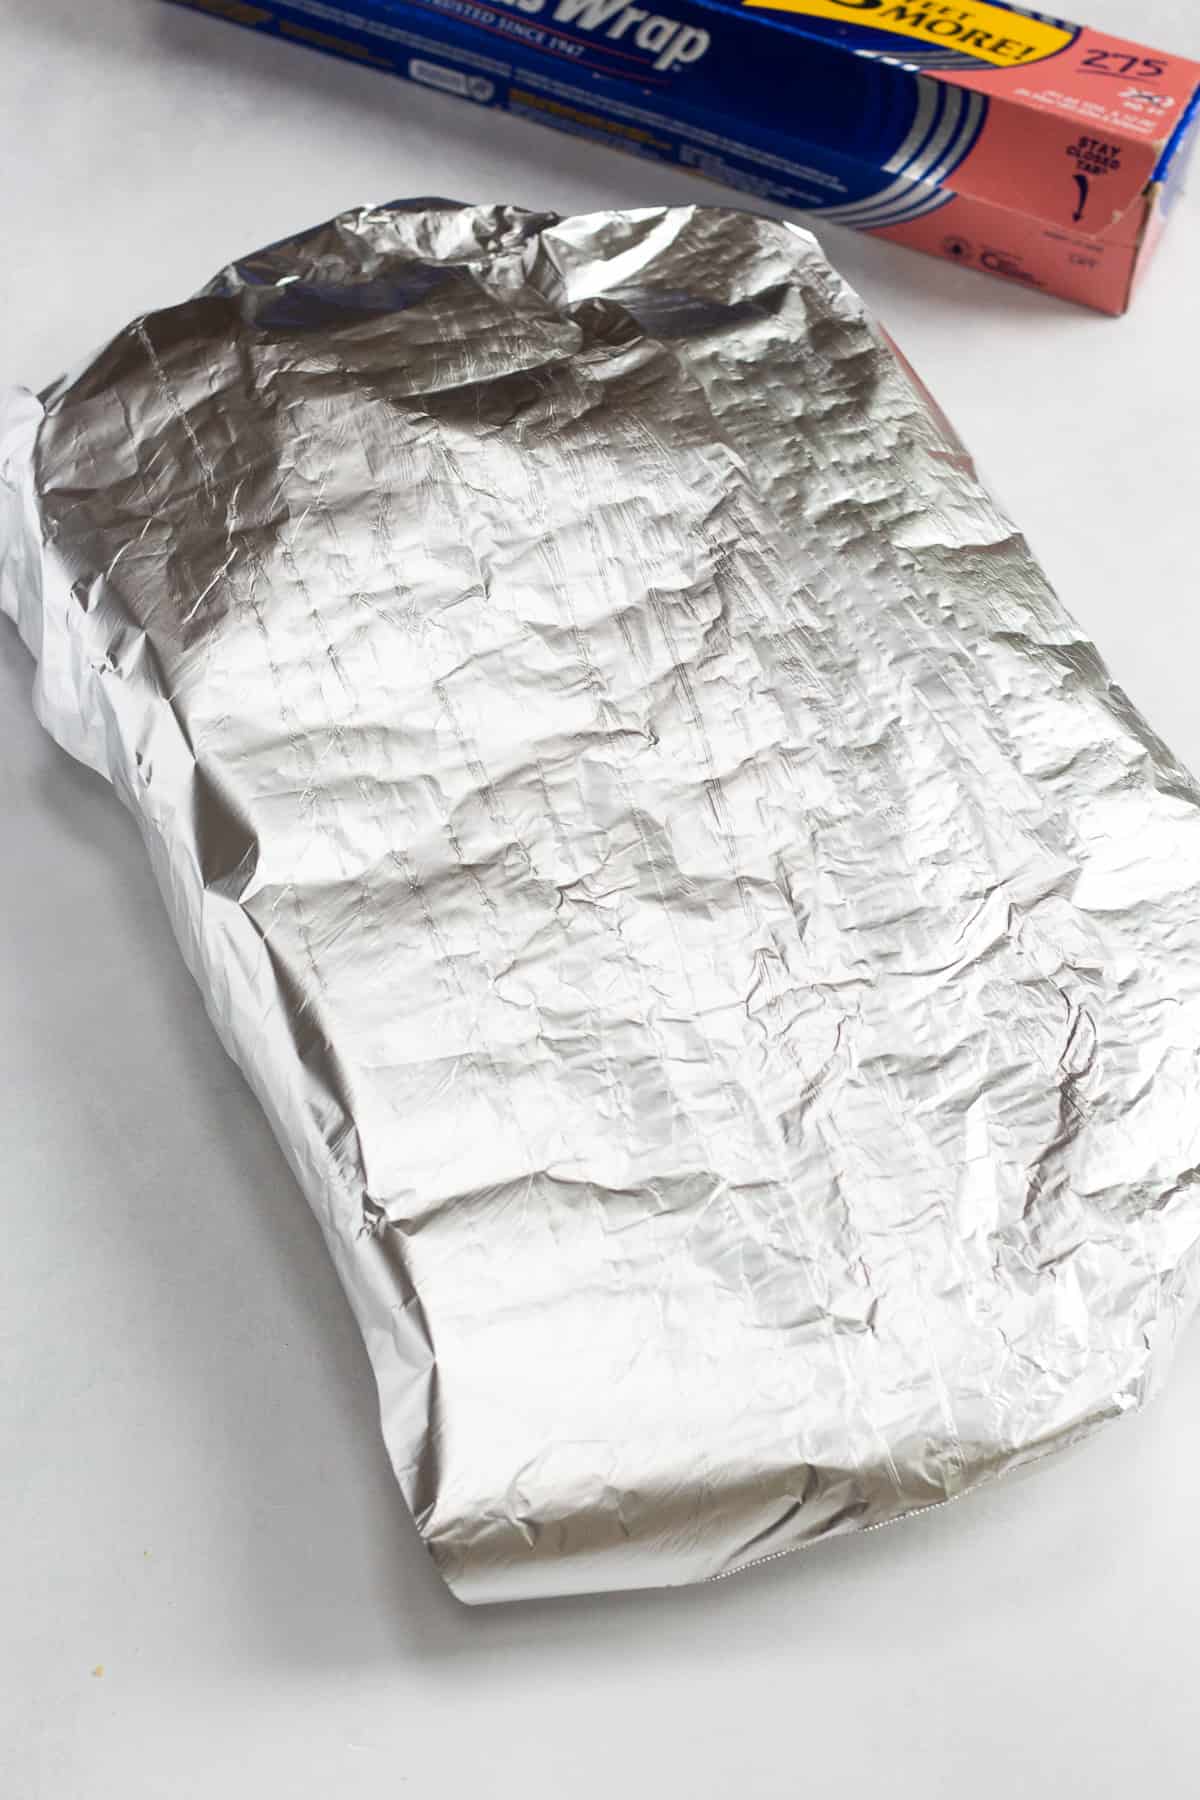 A baking dish covered by aluminum foil.